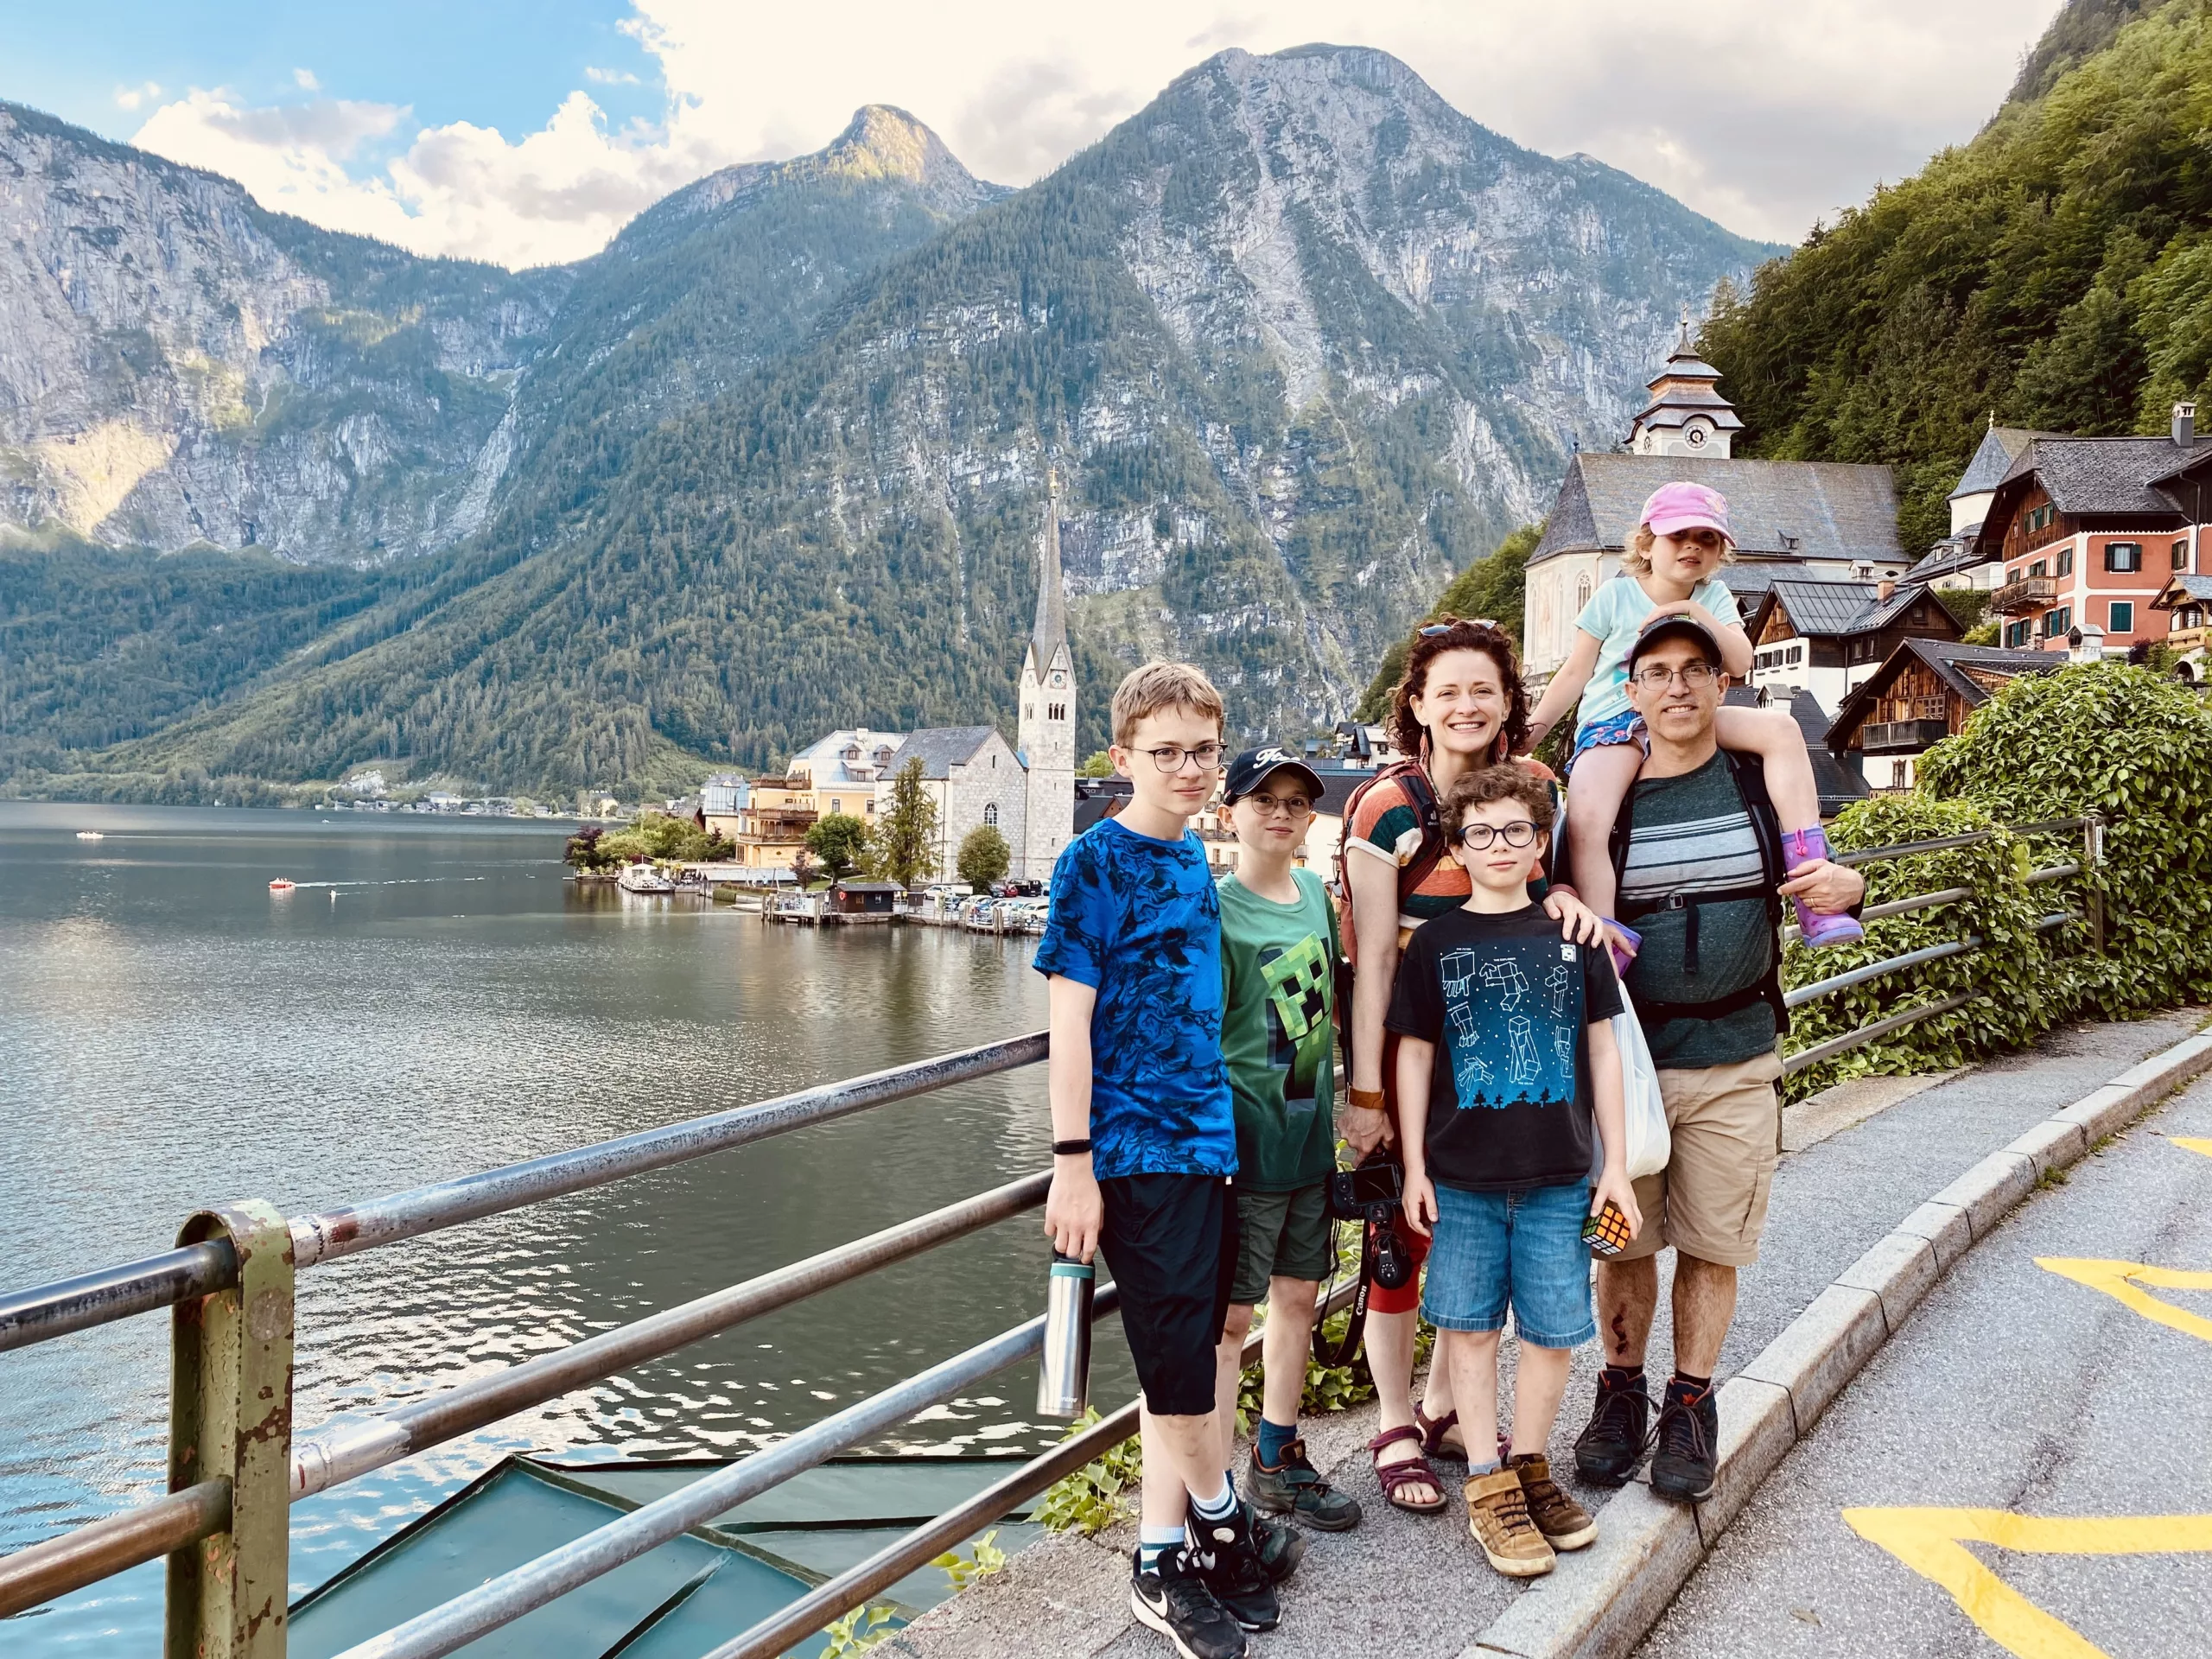 Guide to Visit the Fairytale Village of Hallstatt, Austria and Prevent Overtourism